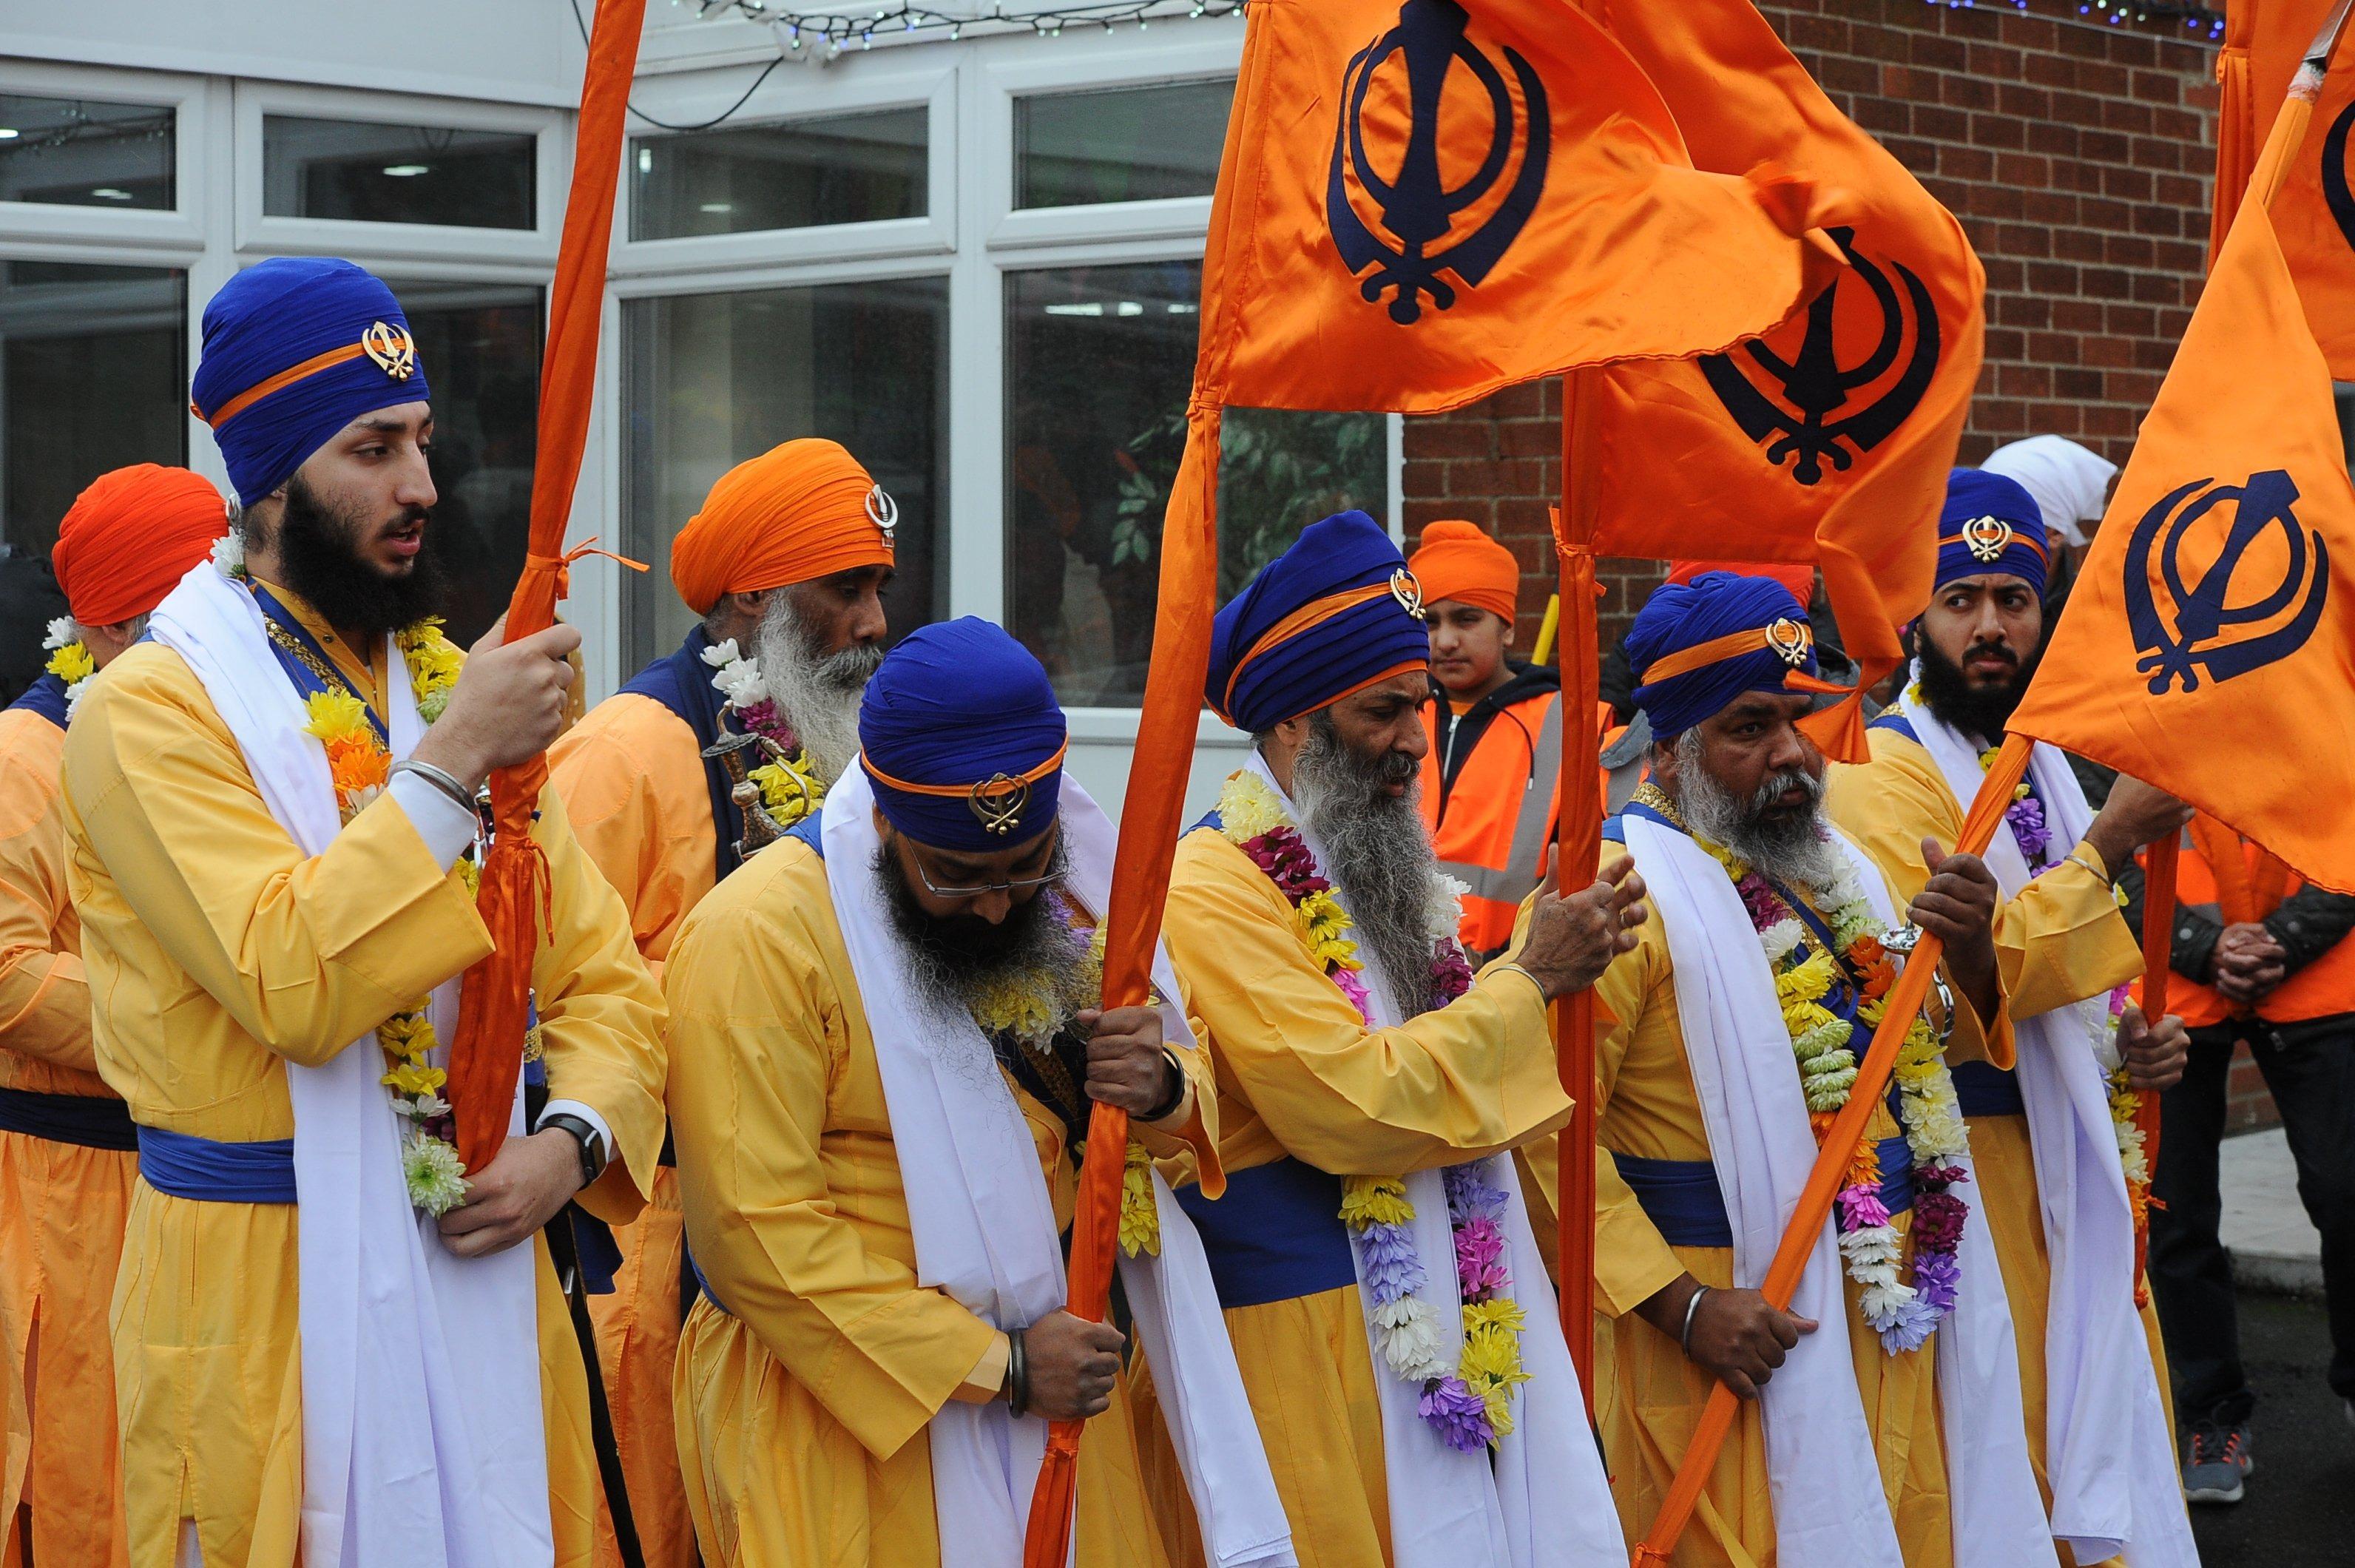 Colourful Peterborough parade as Sikhs celebrate holy day